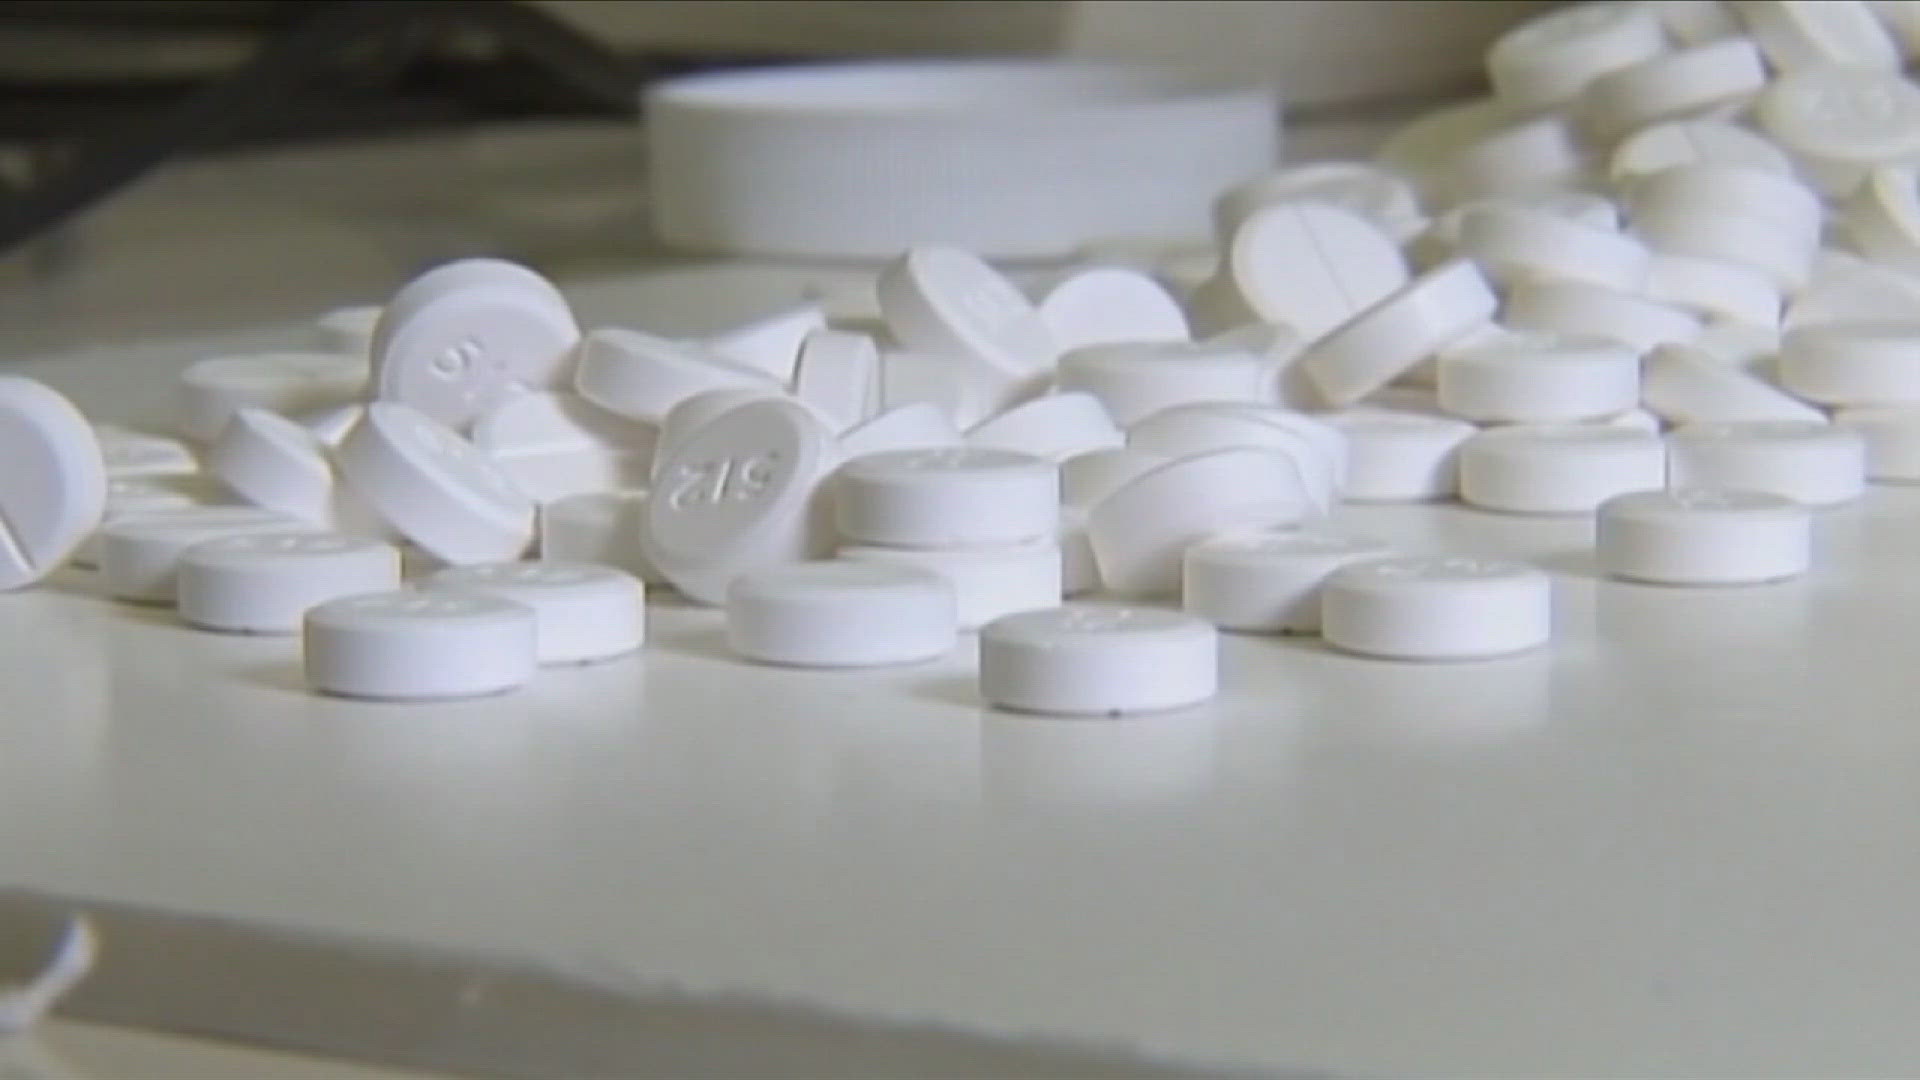 Tennessee ranks eighth in overdose deaths in the country, even though numbers are declining.